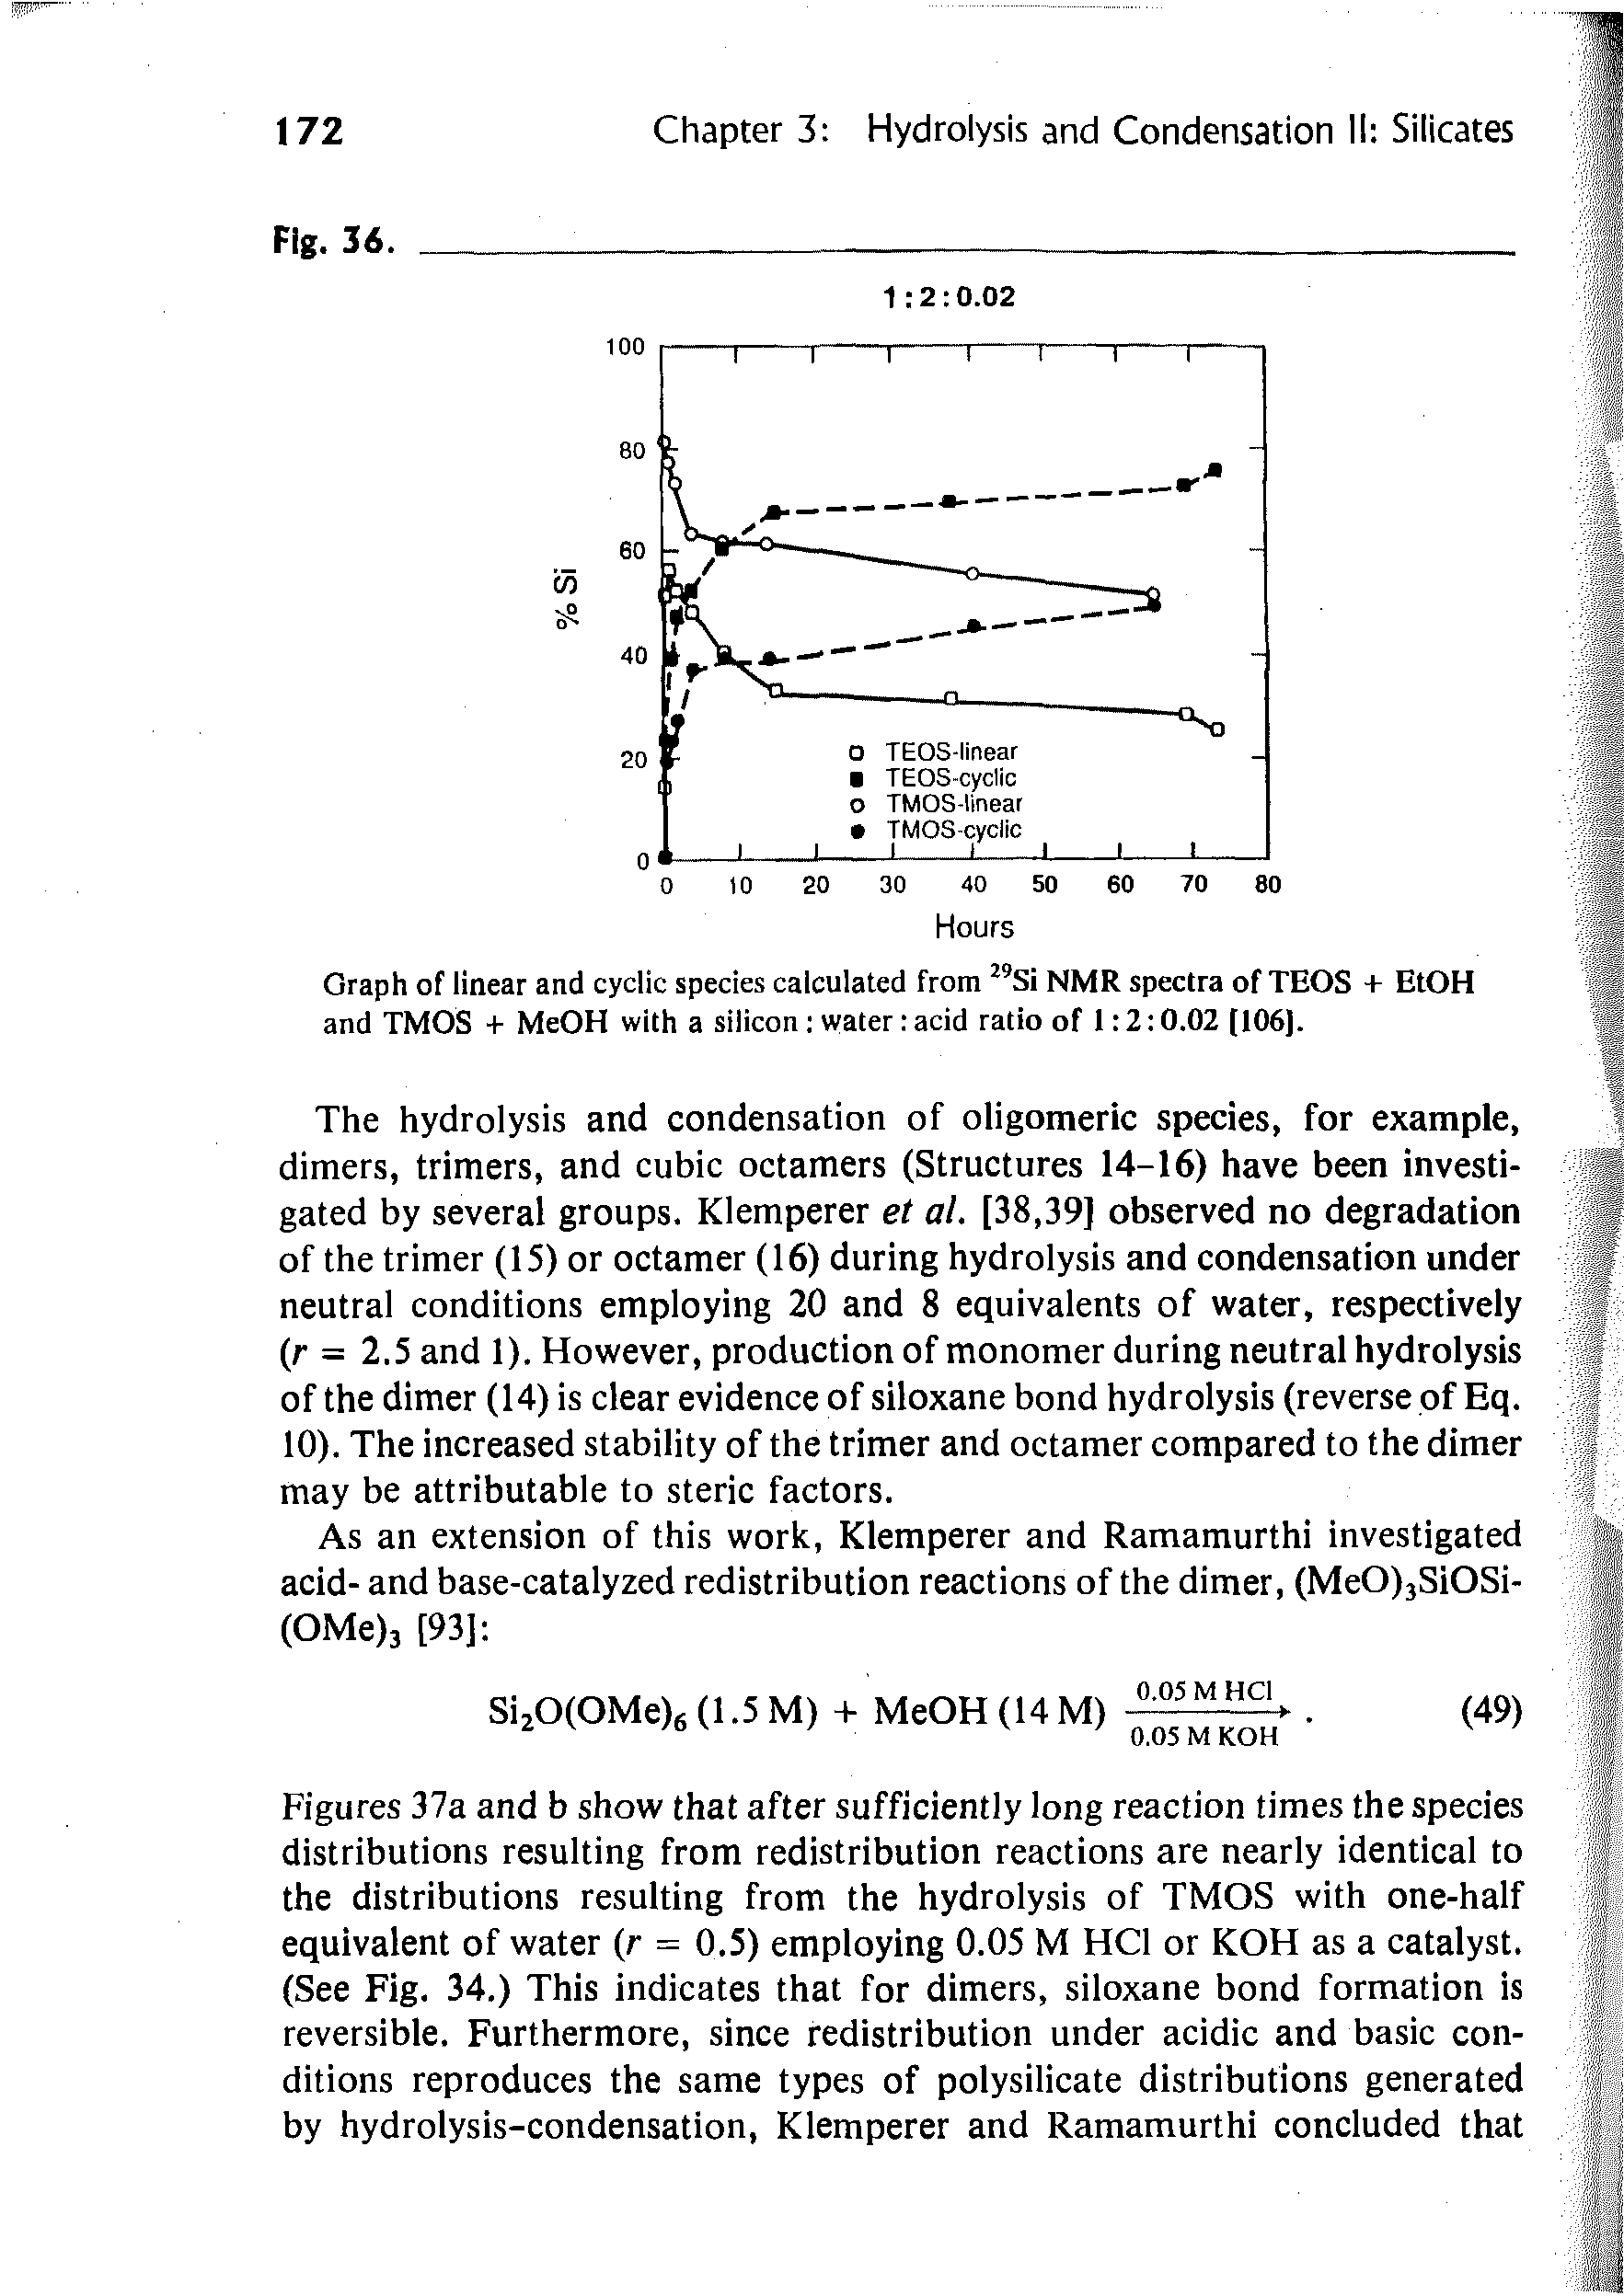 Figures 37a and b show that after sufficiently long reaction times the species distributions resulting from redistribution reactions are nearly identical to the distributions resulting from the hydrolysis of TMOS with one-half equivalent of water r = 0,5) employing 0.05 M HCI or KOH as a catalyst. (See Fig, 34.) This indicates that for dimers, siloxane bond formation is reversible. Furthermore, since redistribution under acidic and basic conditions reproduces the same types of polysilicate distributions generated by hydrolysis-condensation, Klemperer and Ramamurthi concluded that...